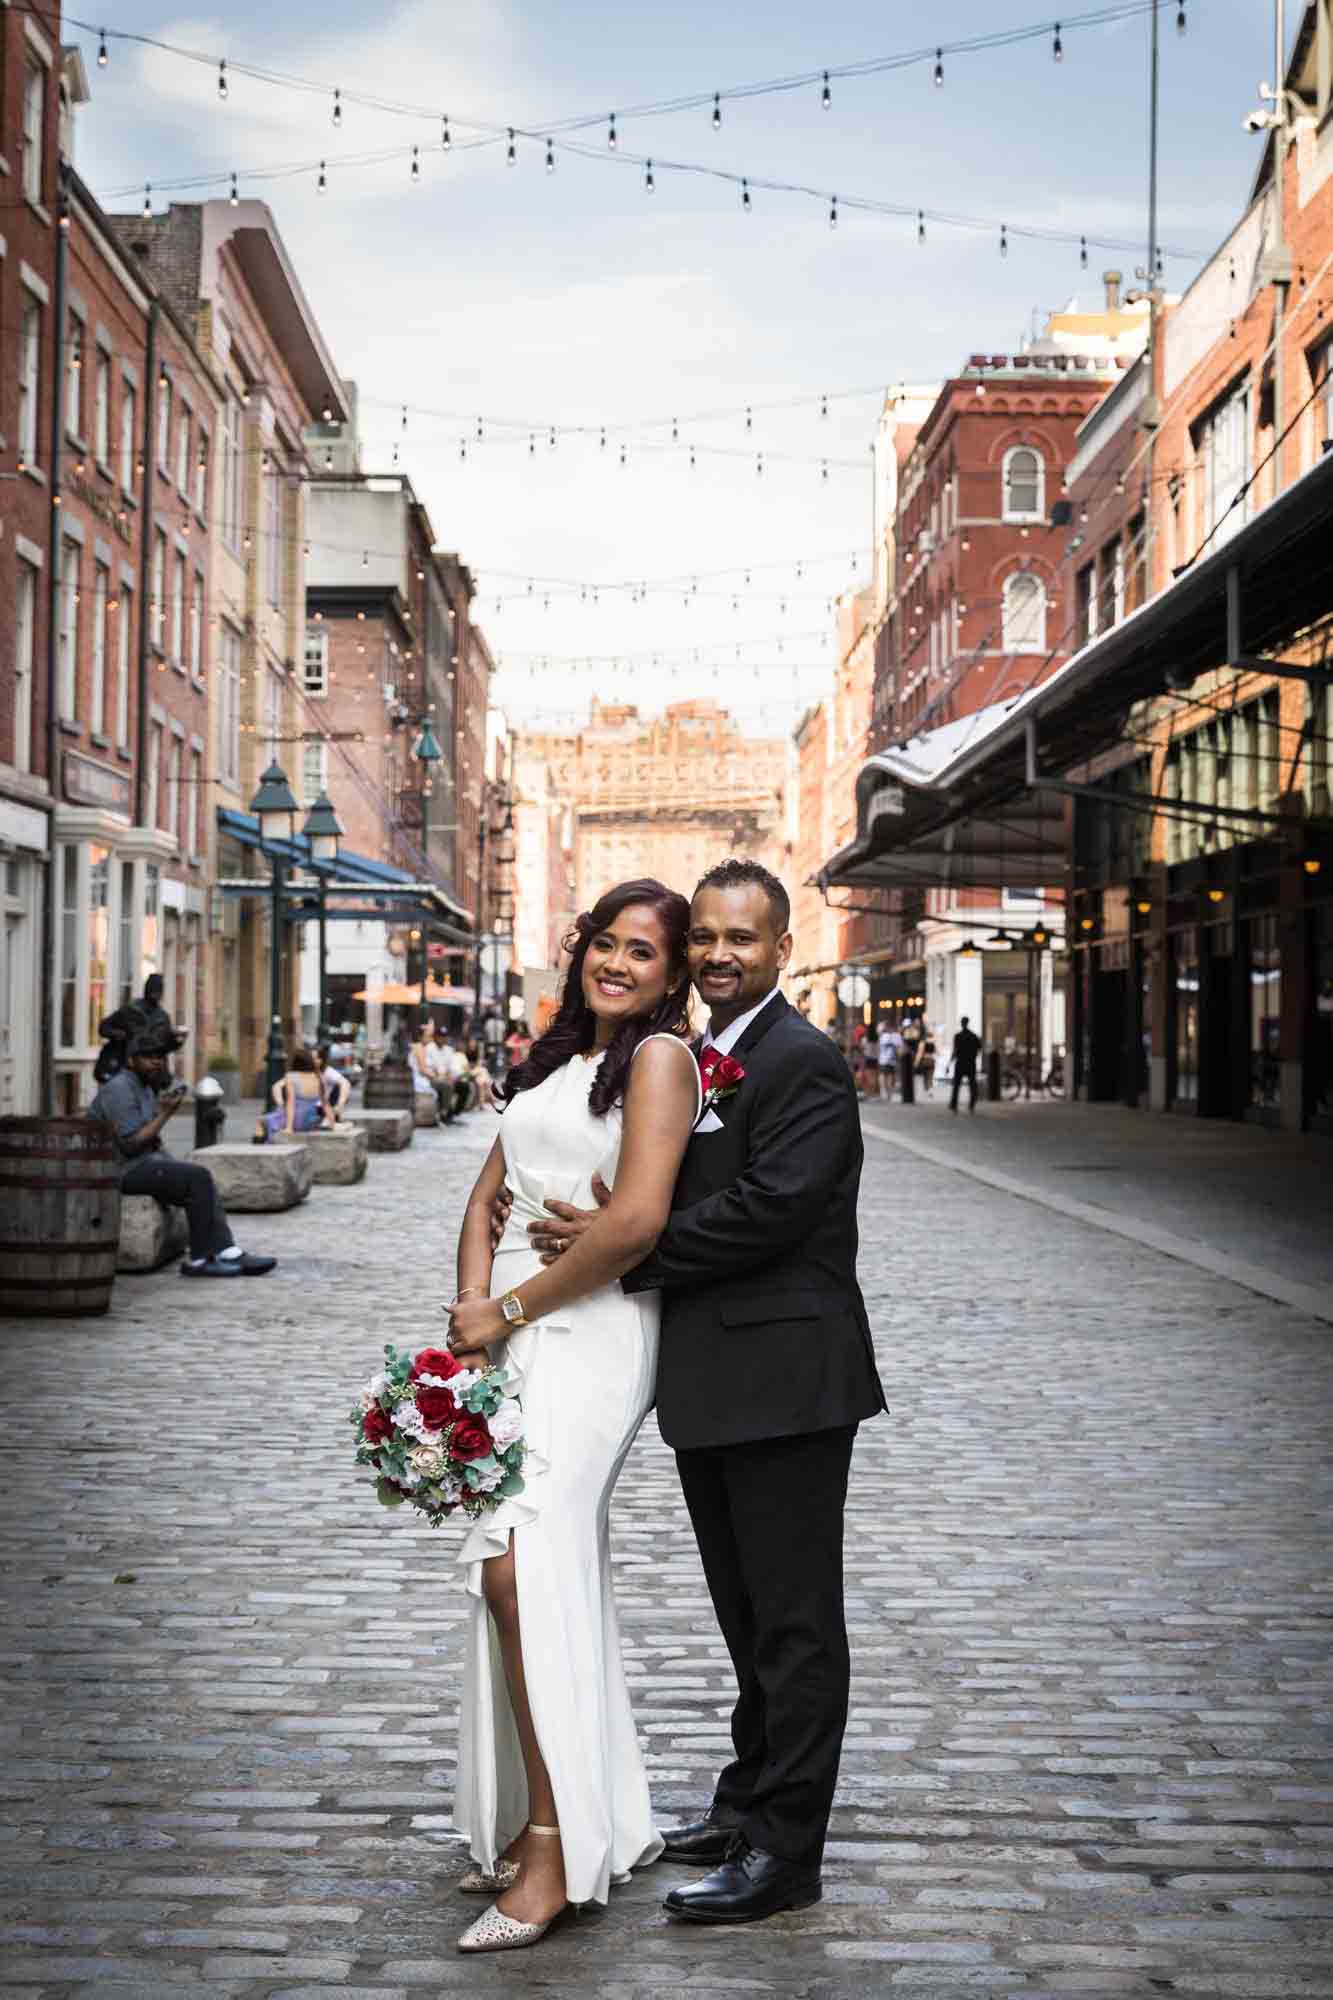 Bride and groom hugging on cobblestone street in South Street Seaport